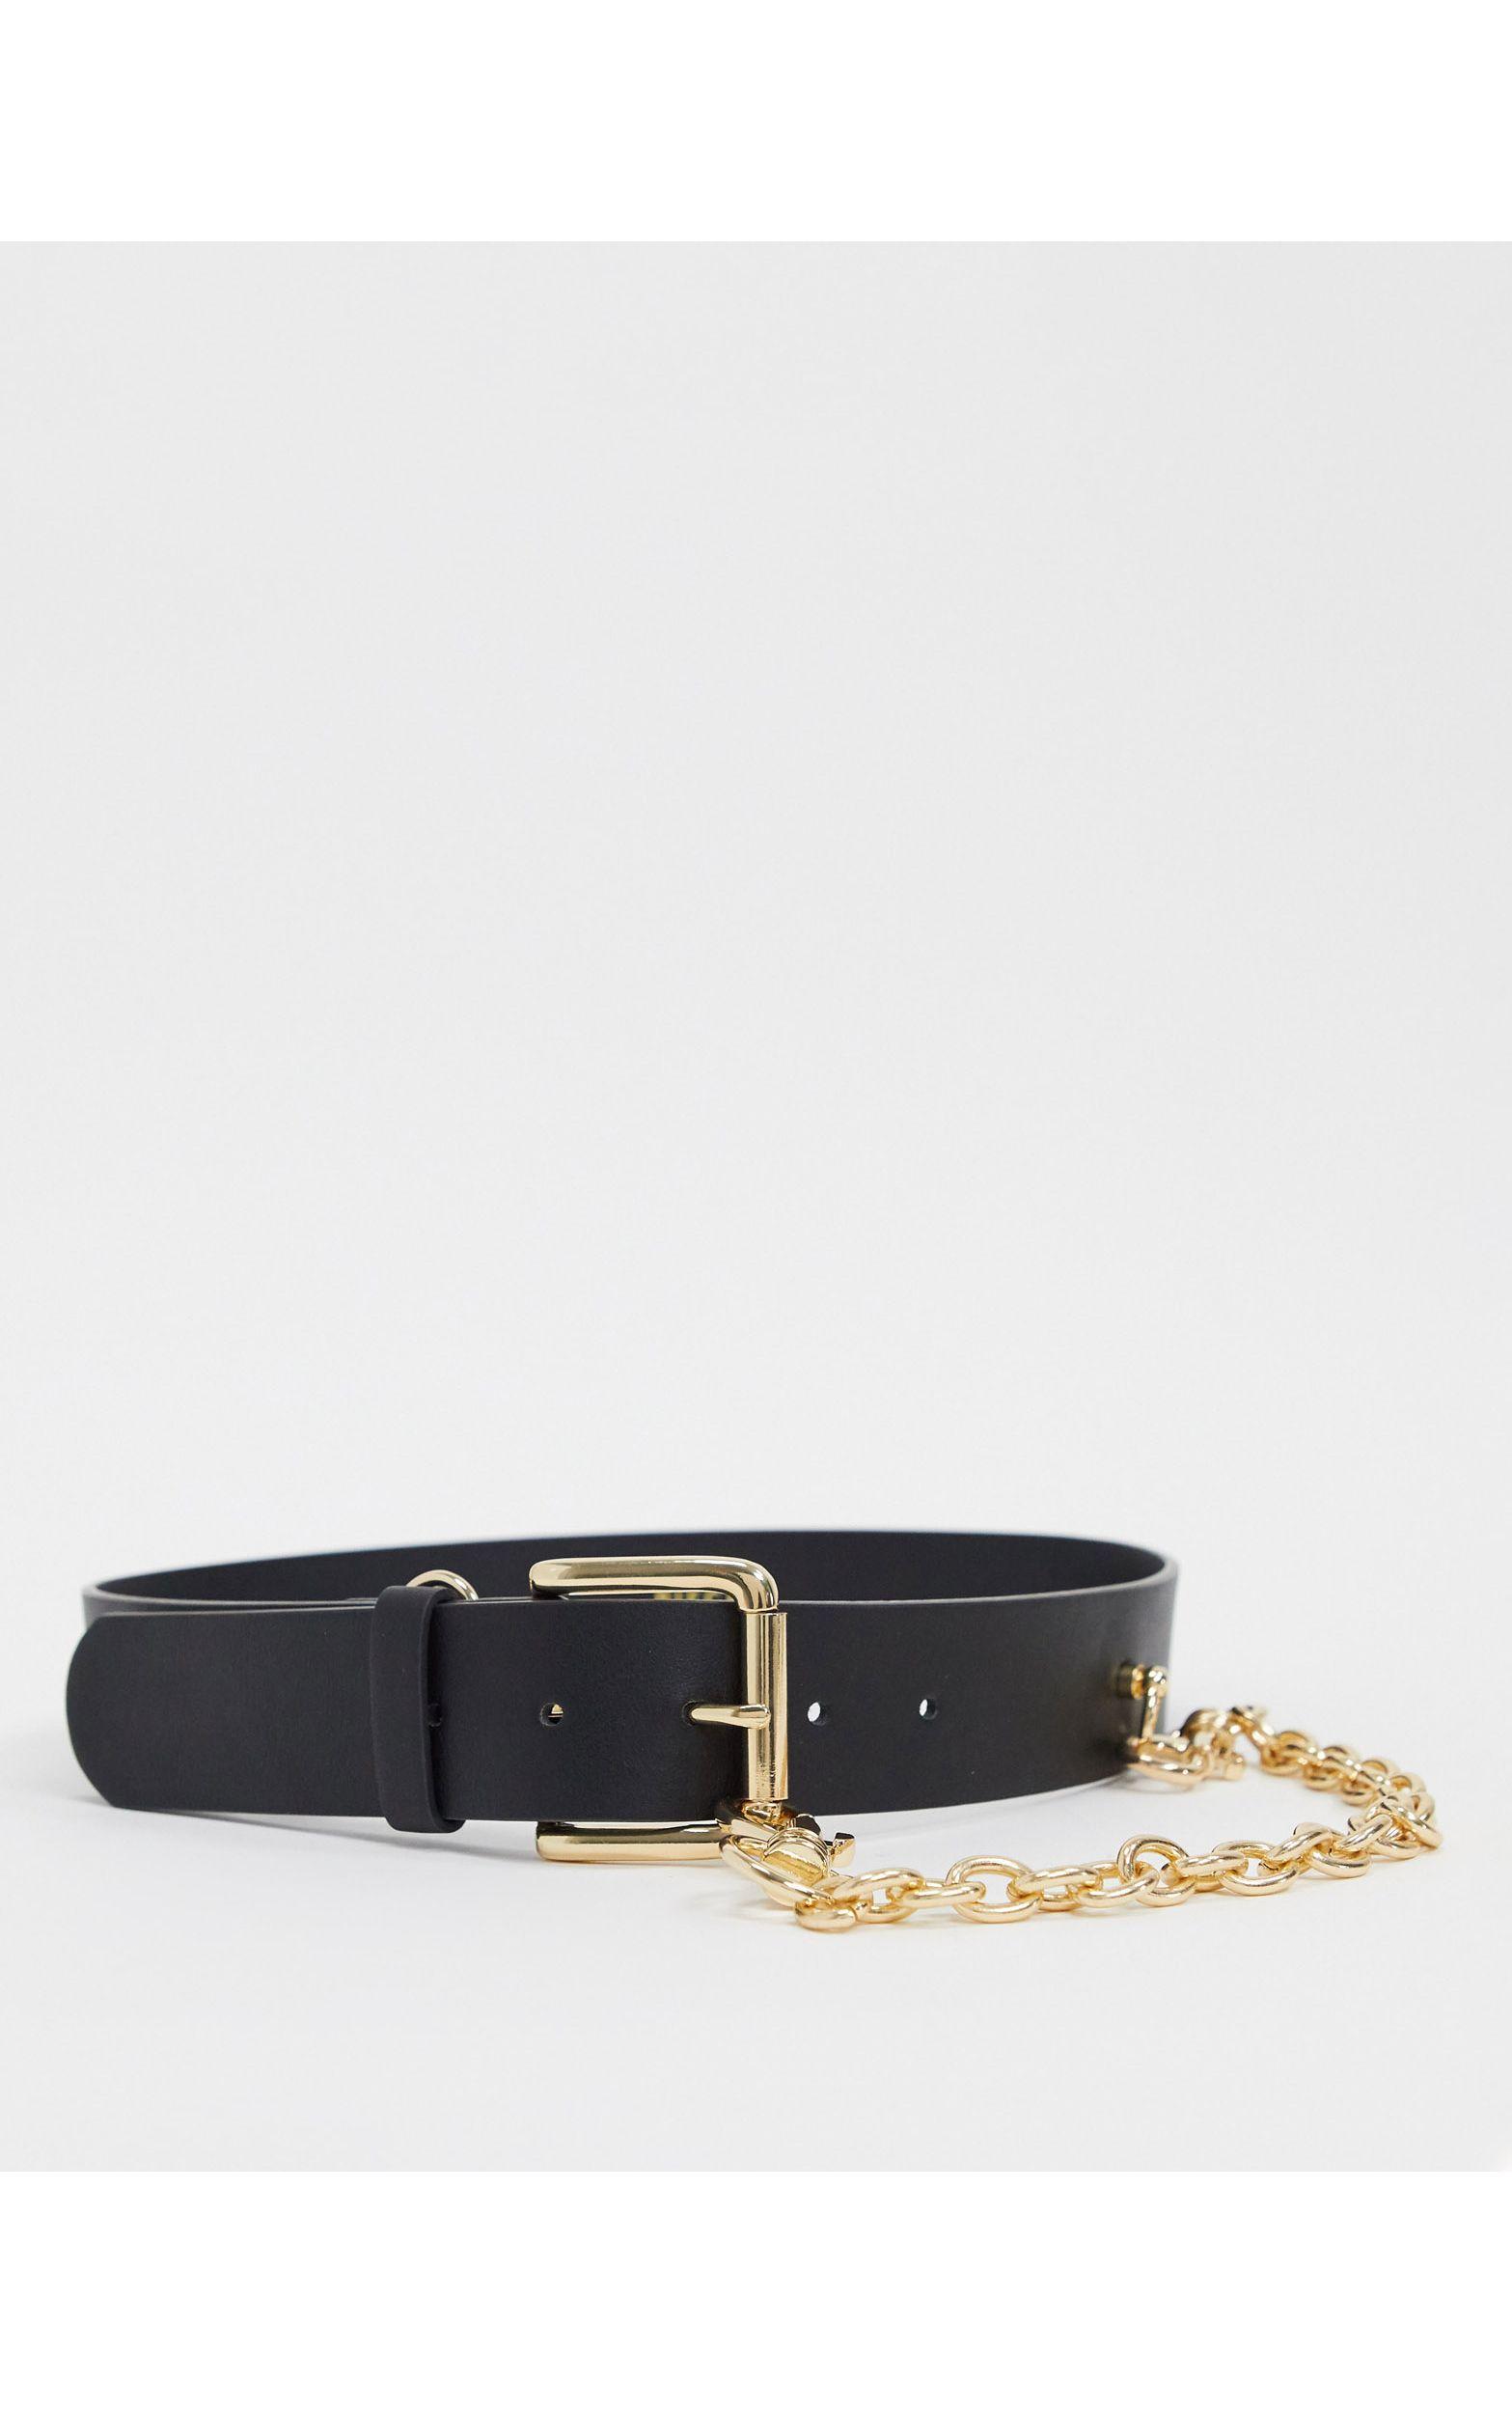 Details: leather, chain, black over black